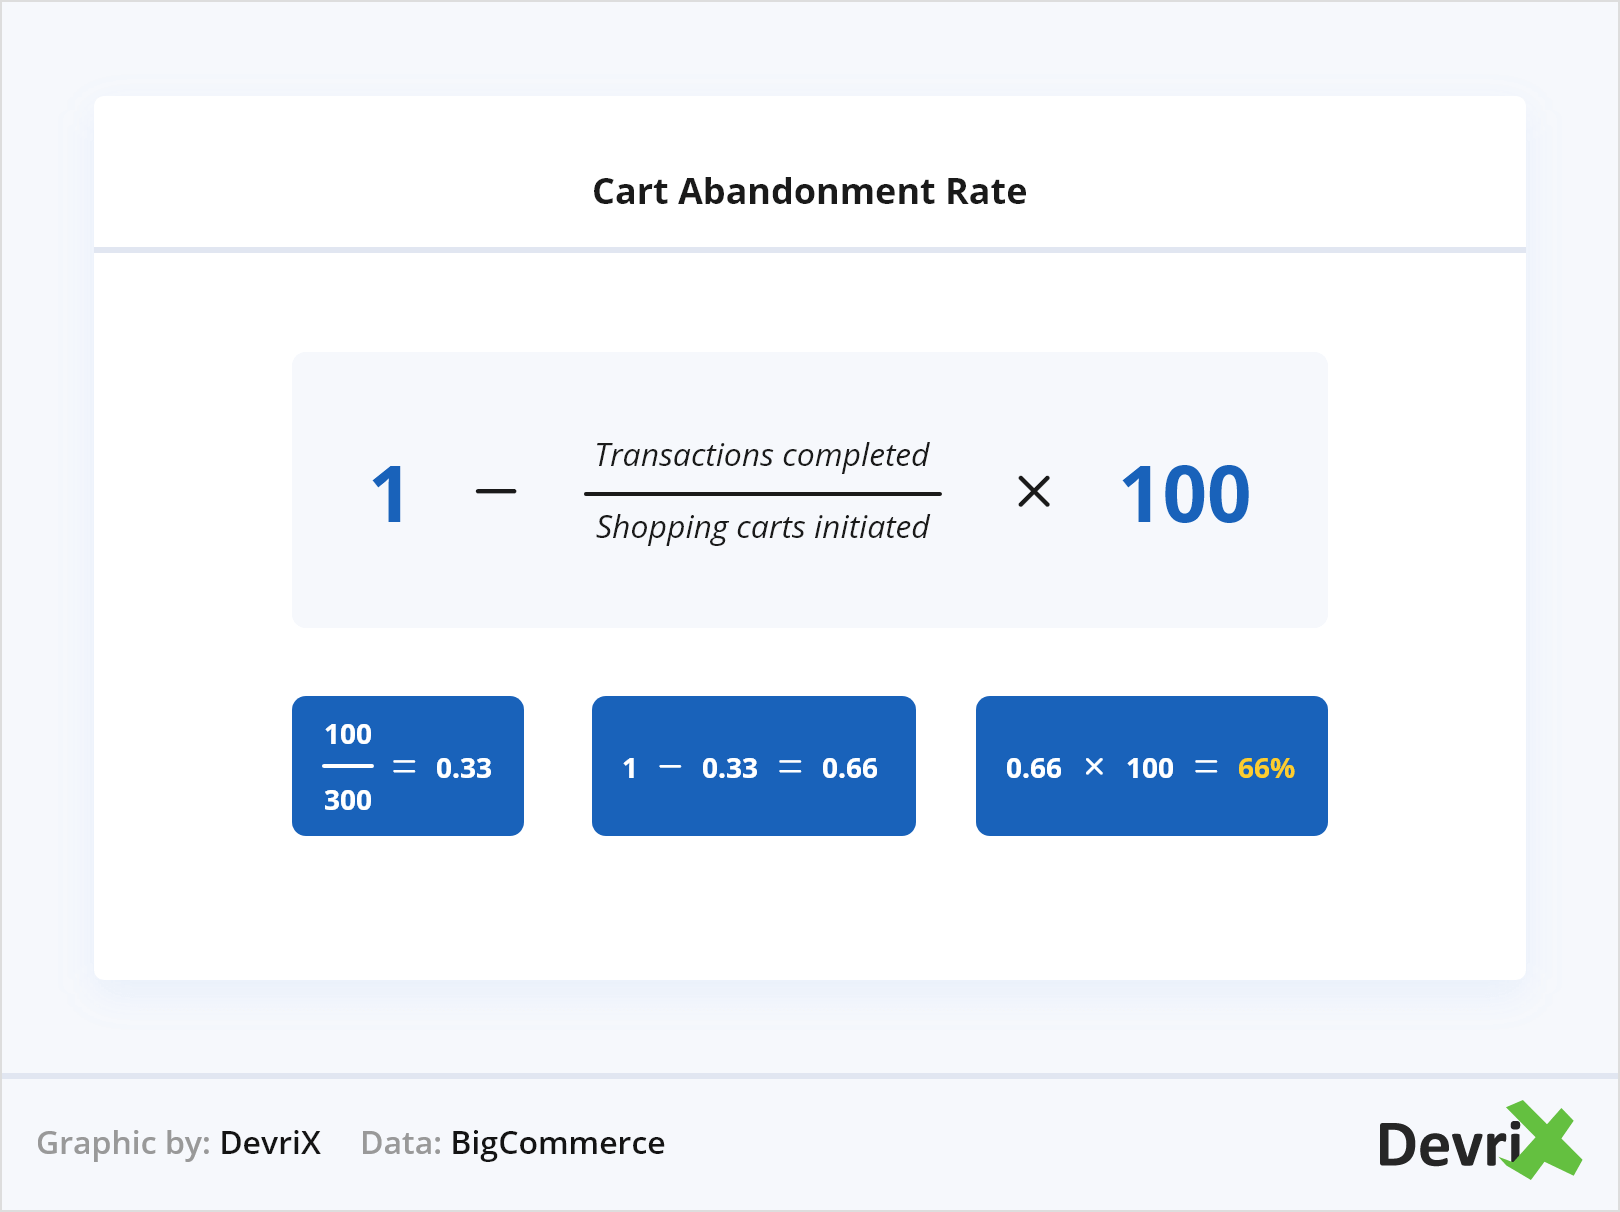 Shopping Cart Abandonment Rate